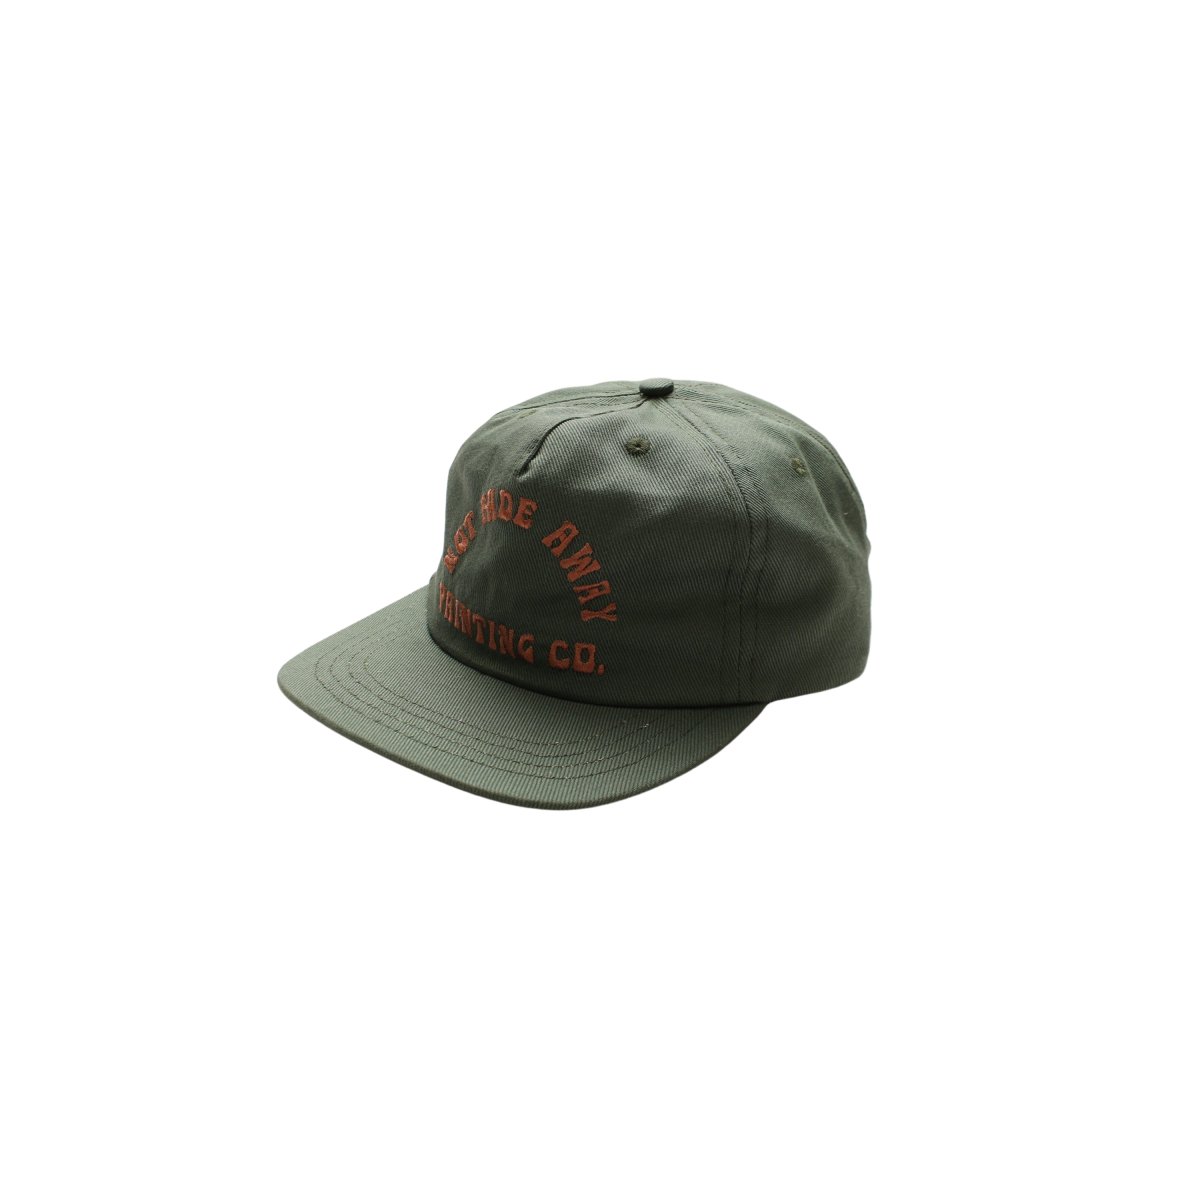 NOT FADE AWAY PAINTING CO. HAT 【GREEN】